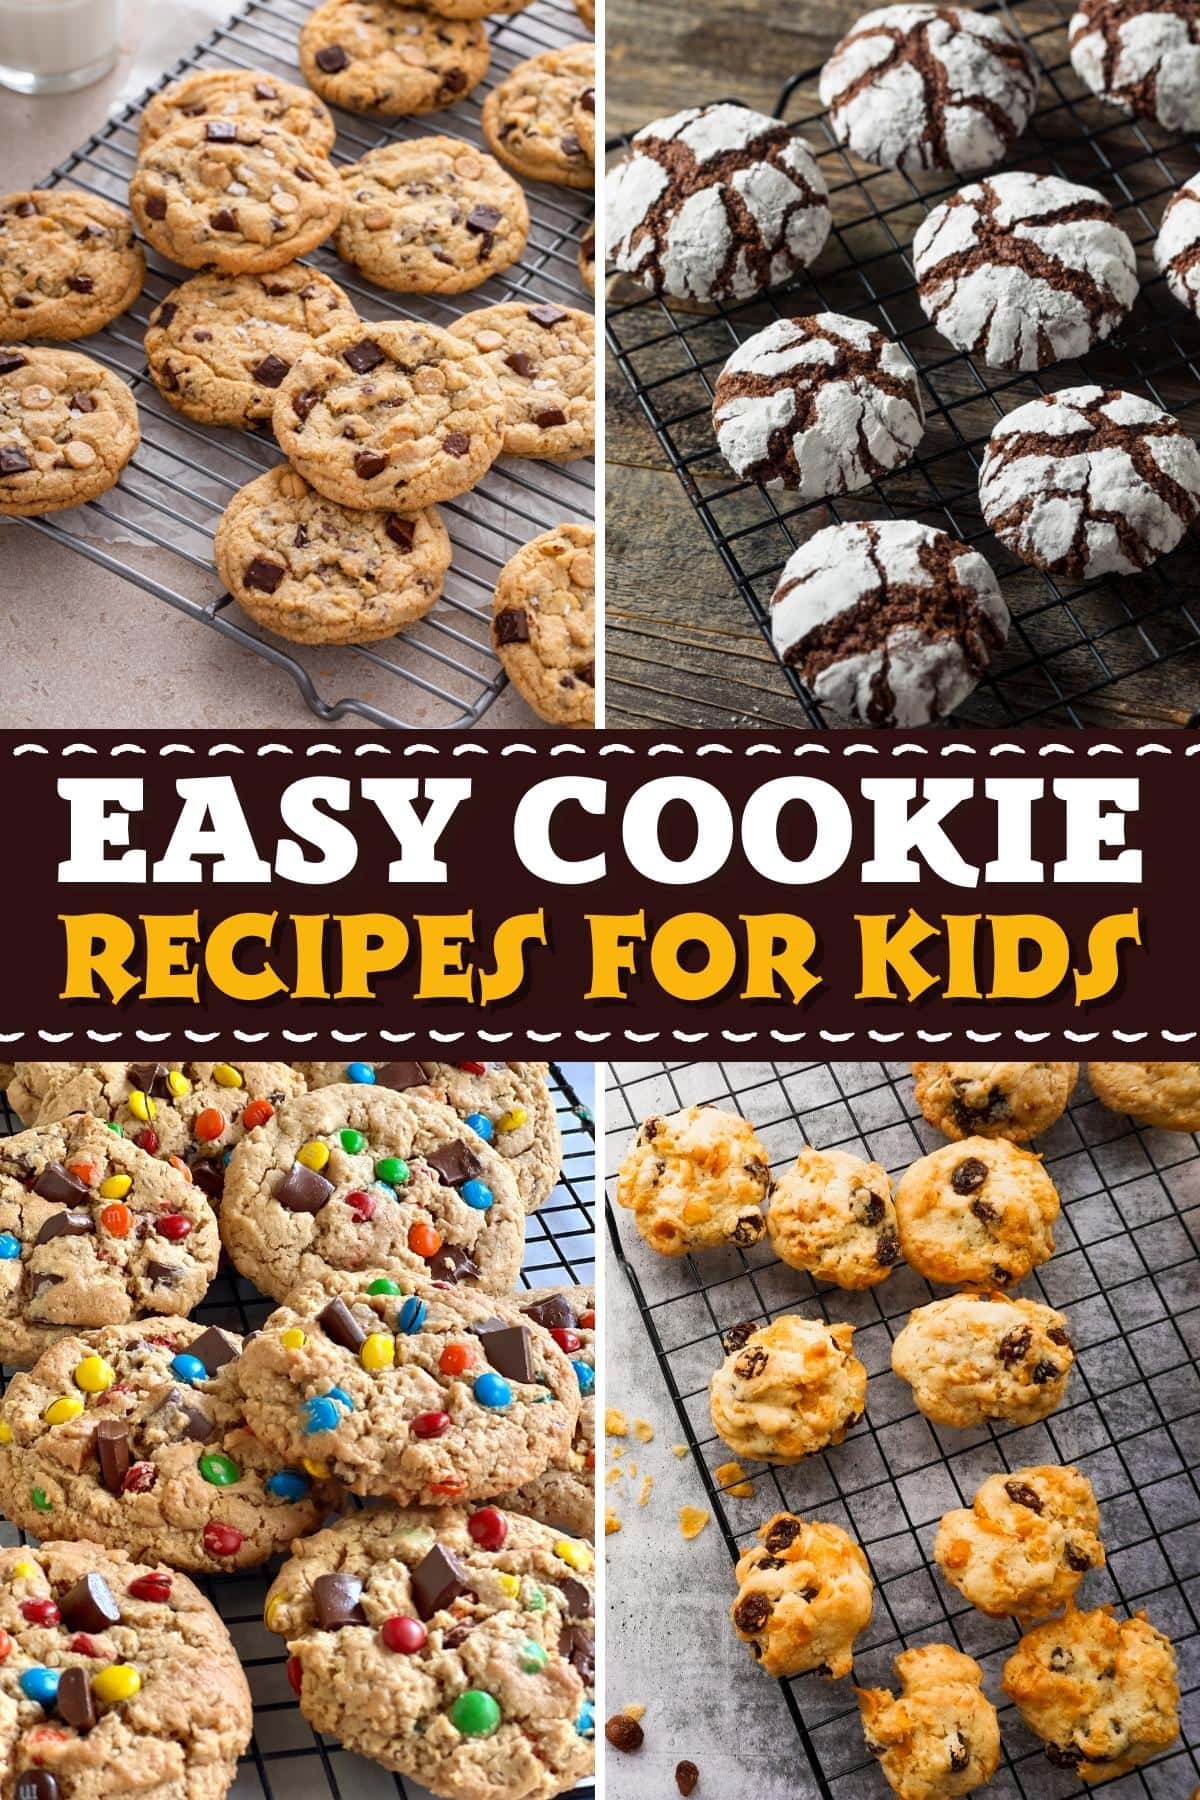 25 Easy Cookie Recipes for Kids - Insanely Good